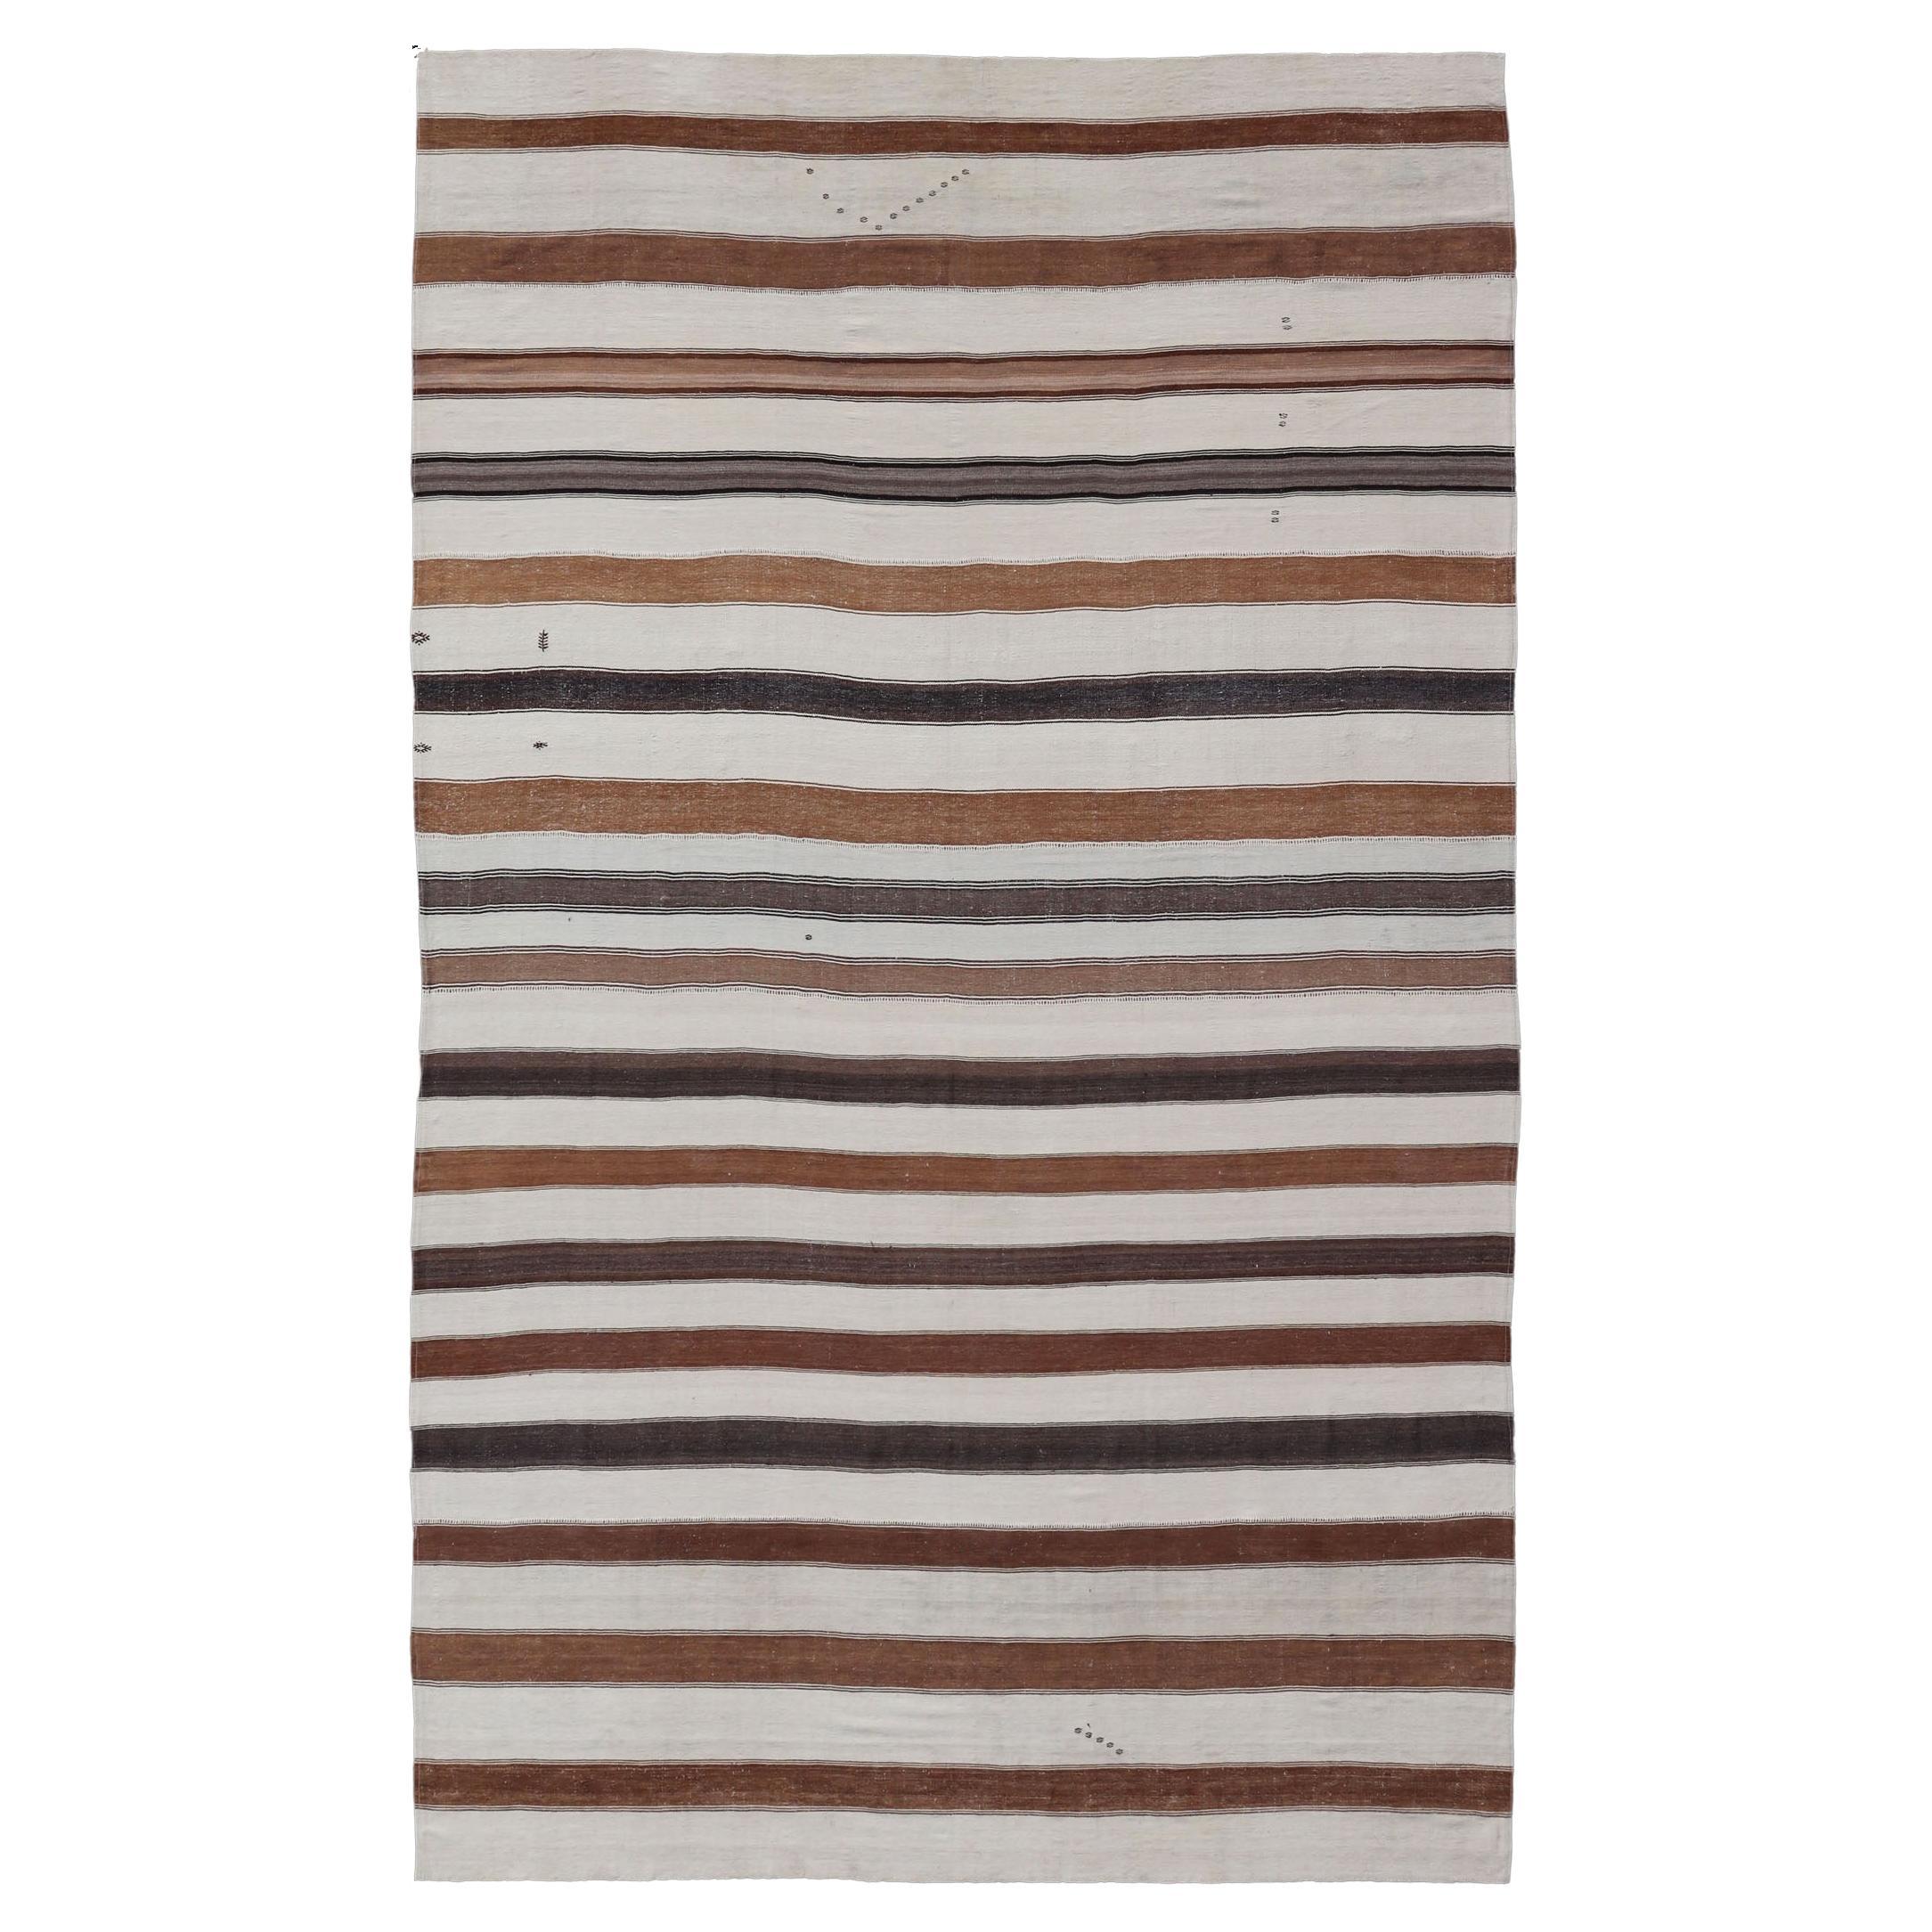 Large Vintage Turkish Kilim with Vertical Stripes in Tan, Taupe, Cream and Brown